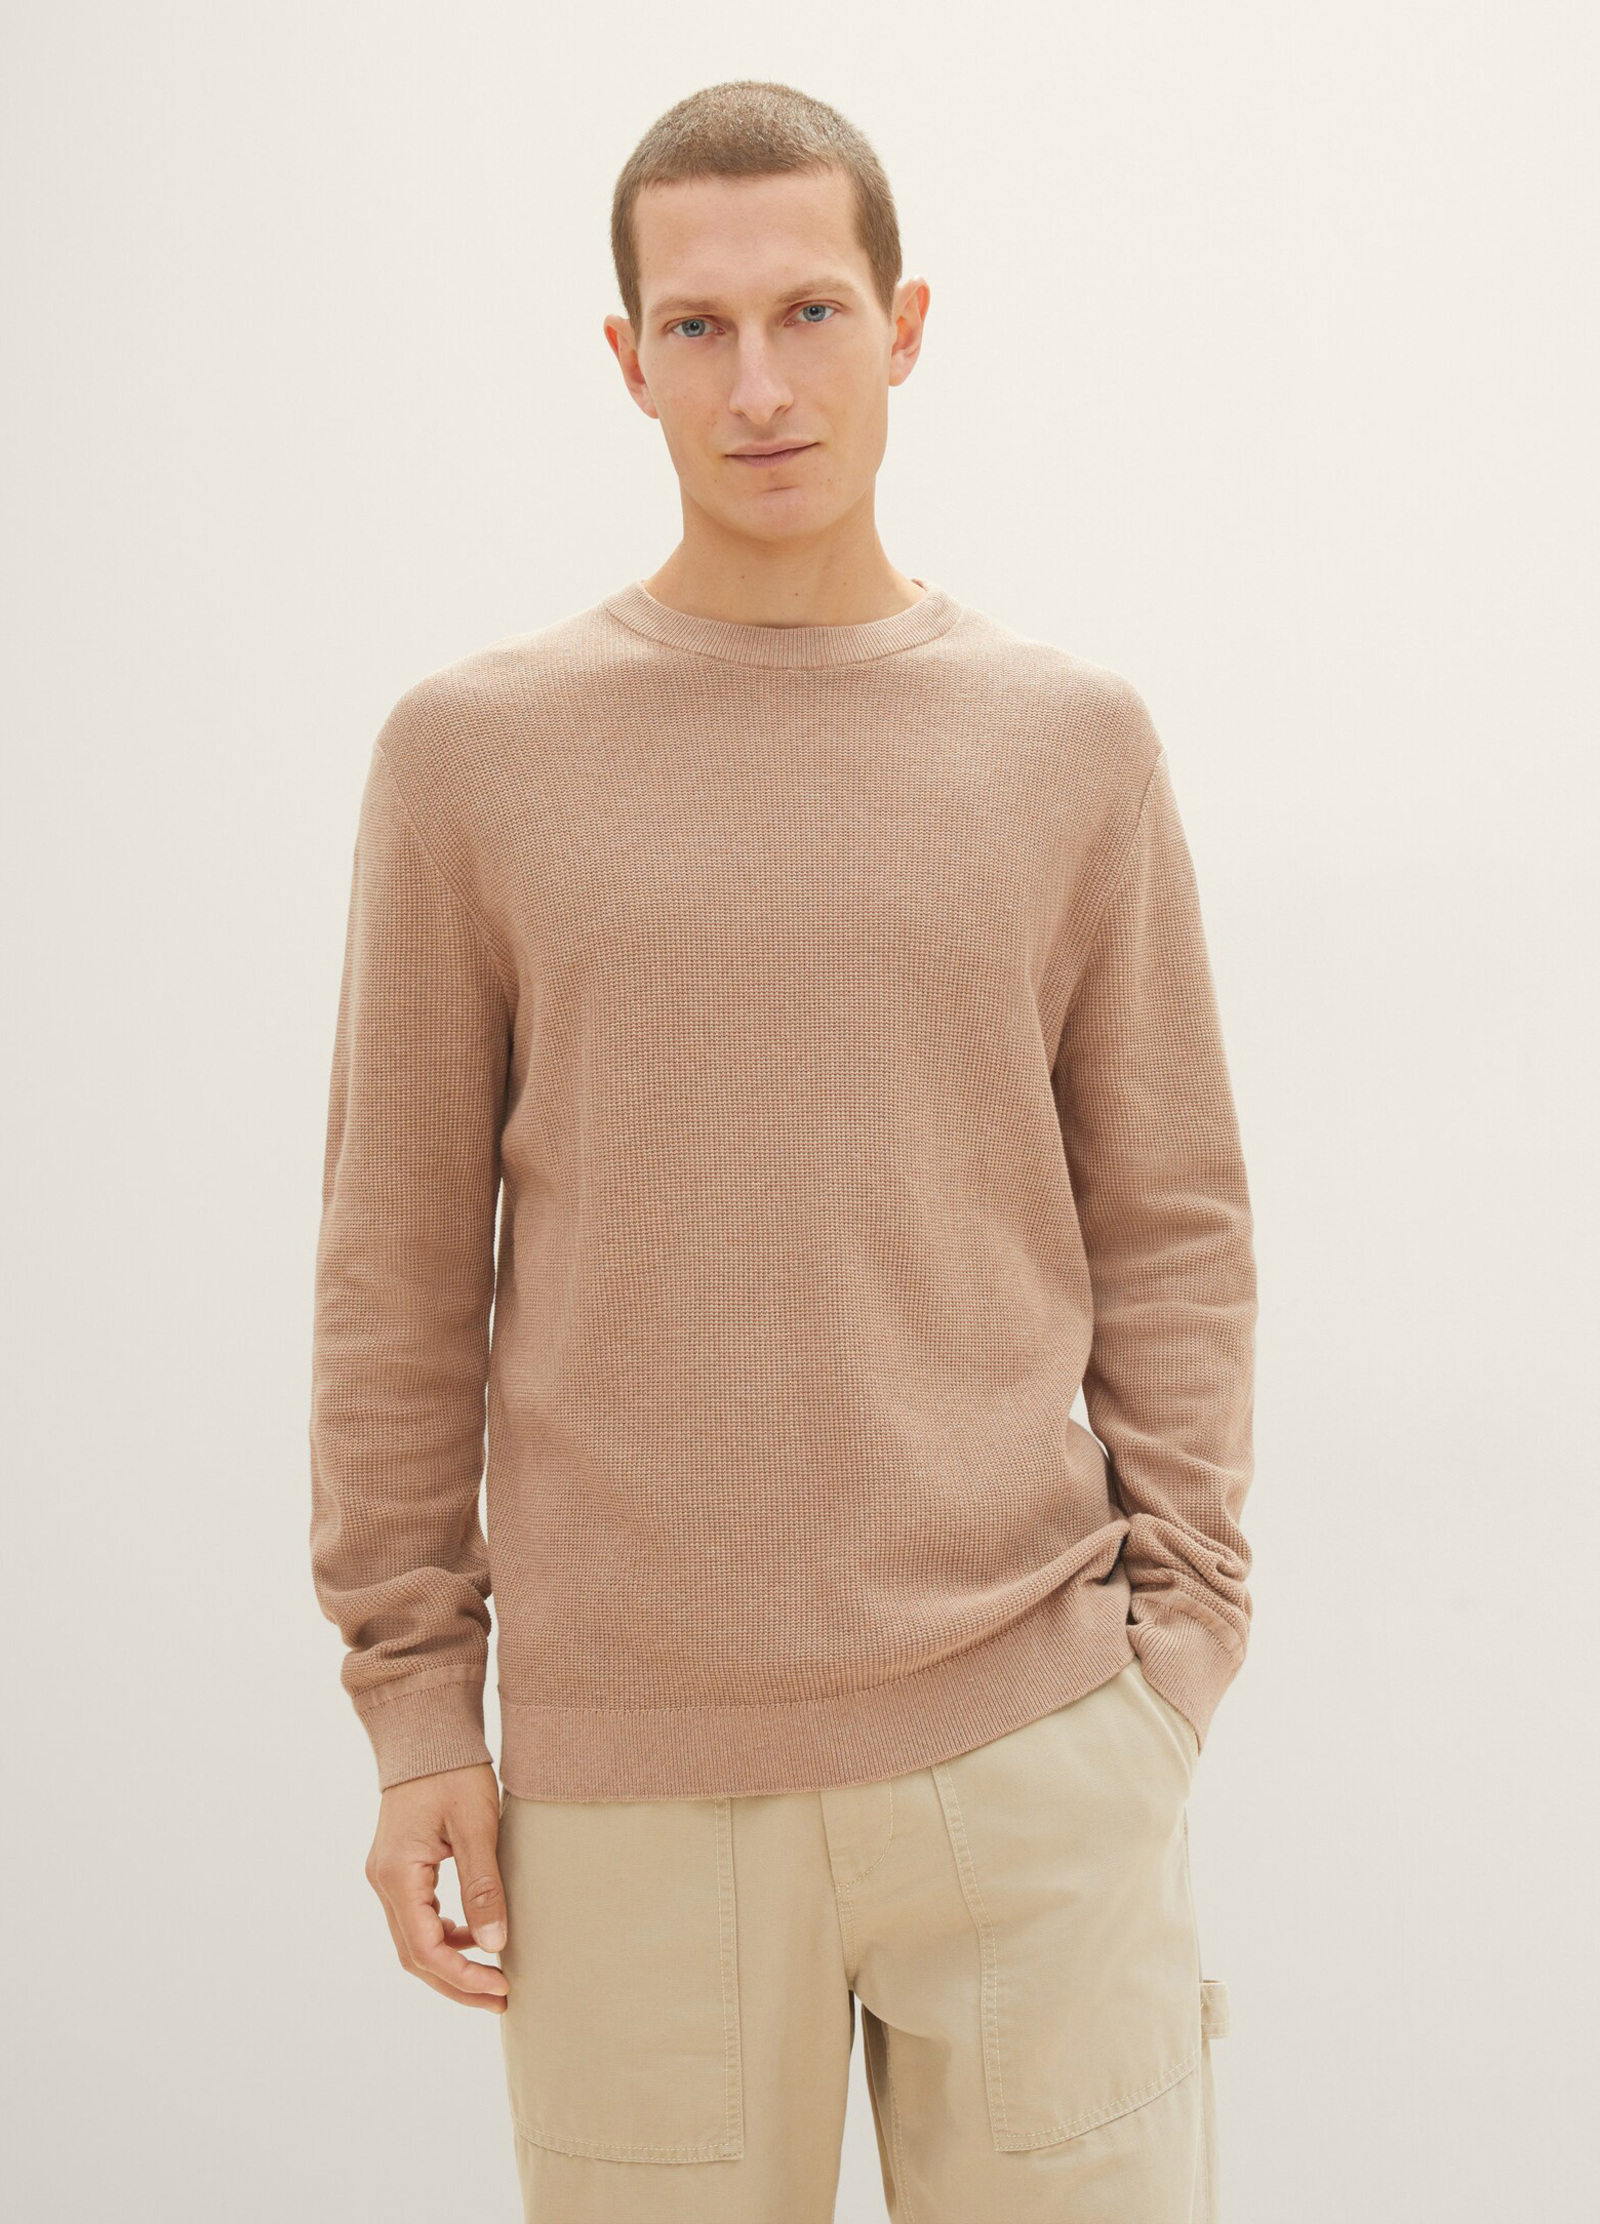 Tom Tailor Knitted Sweater With Texture Hazel Brown Melange - 1038612-31089